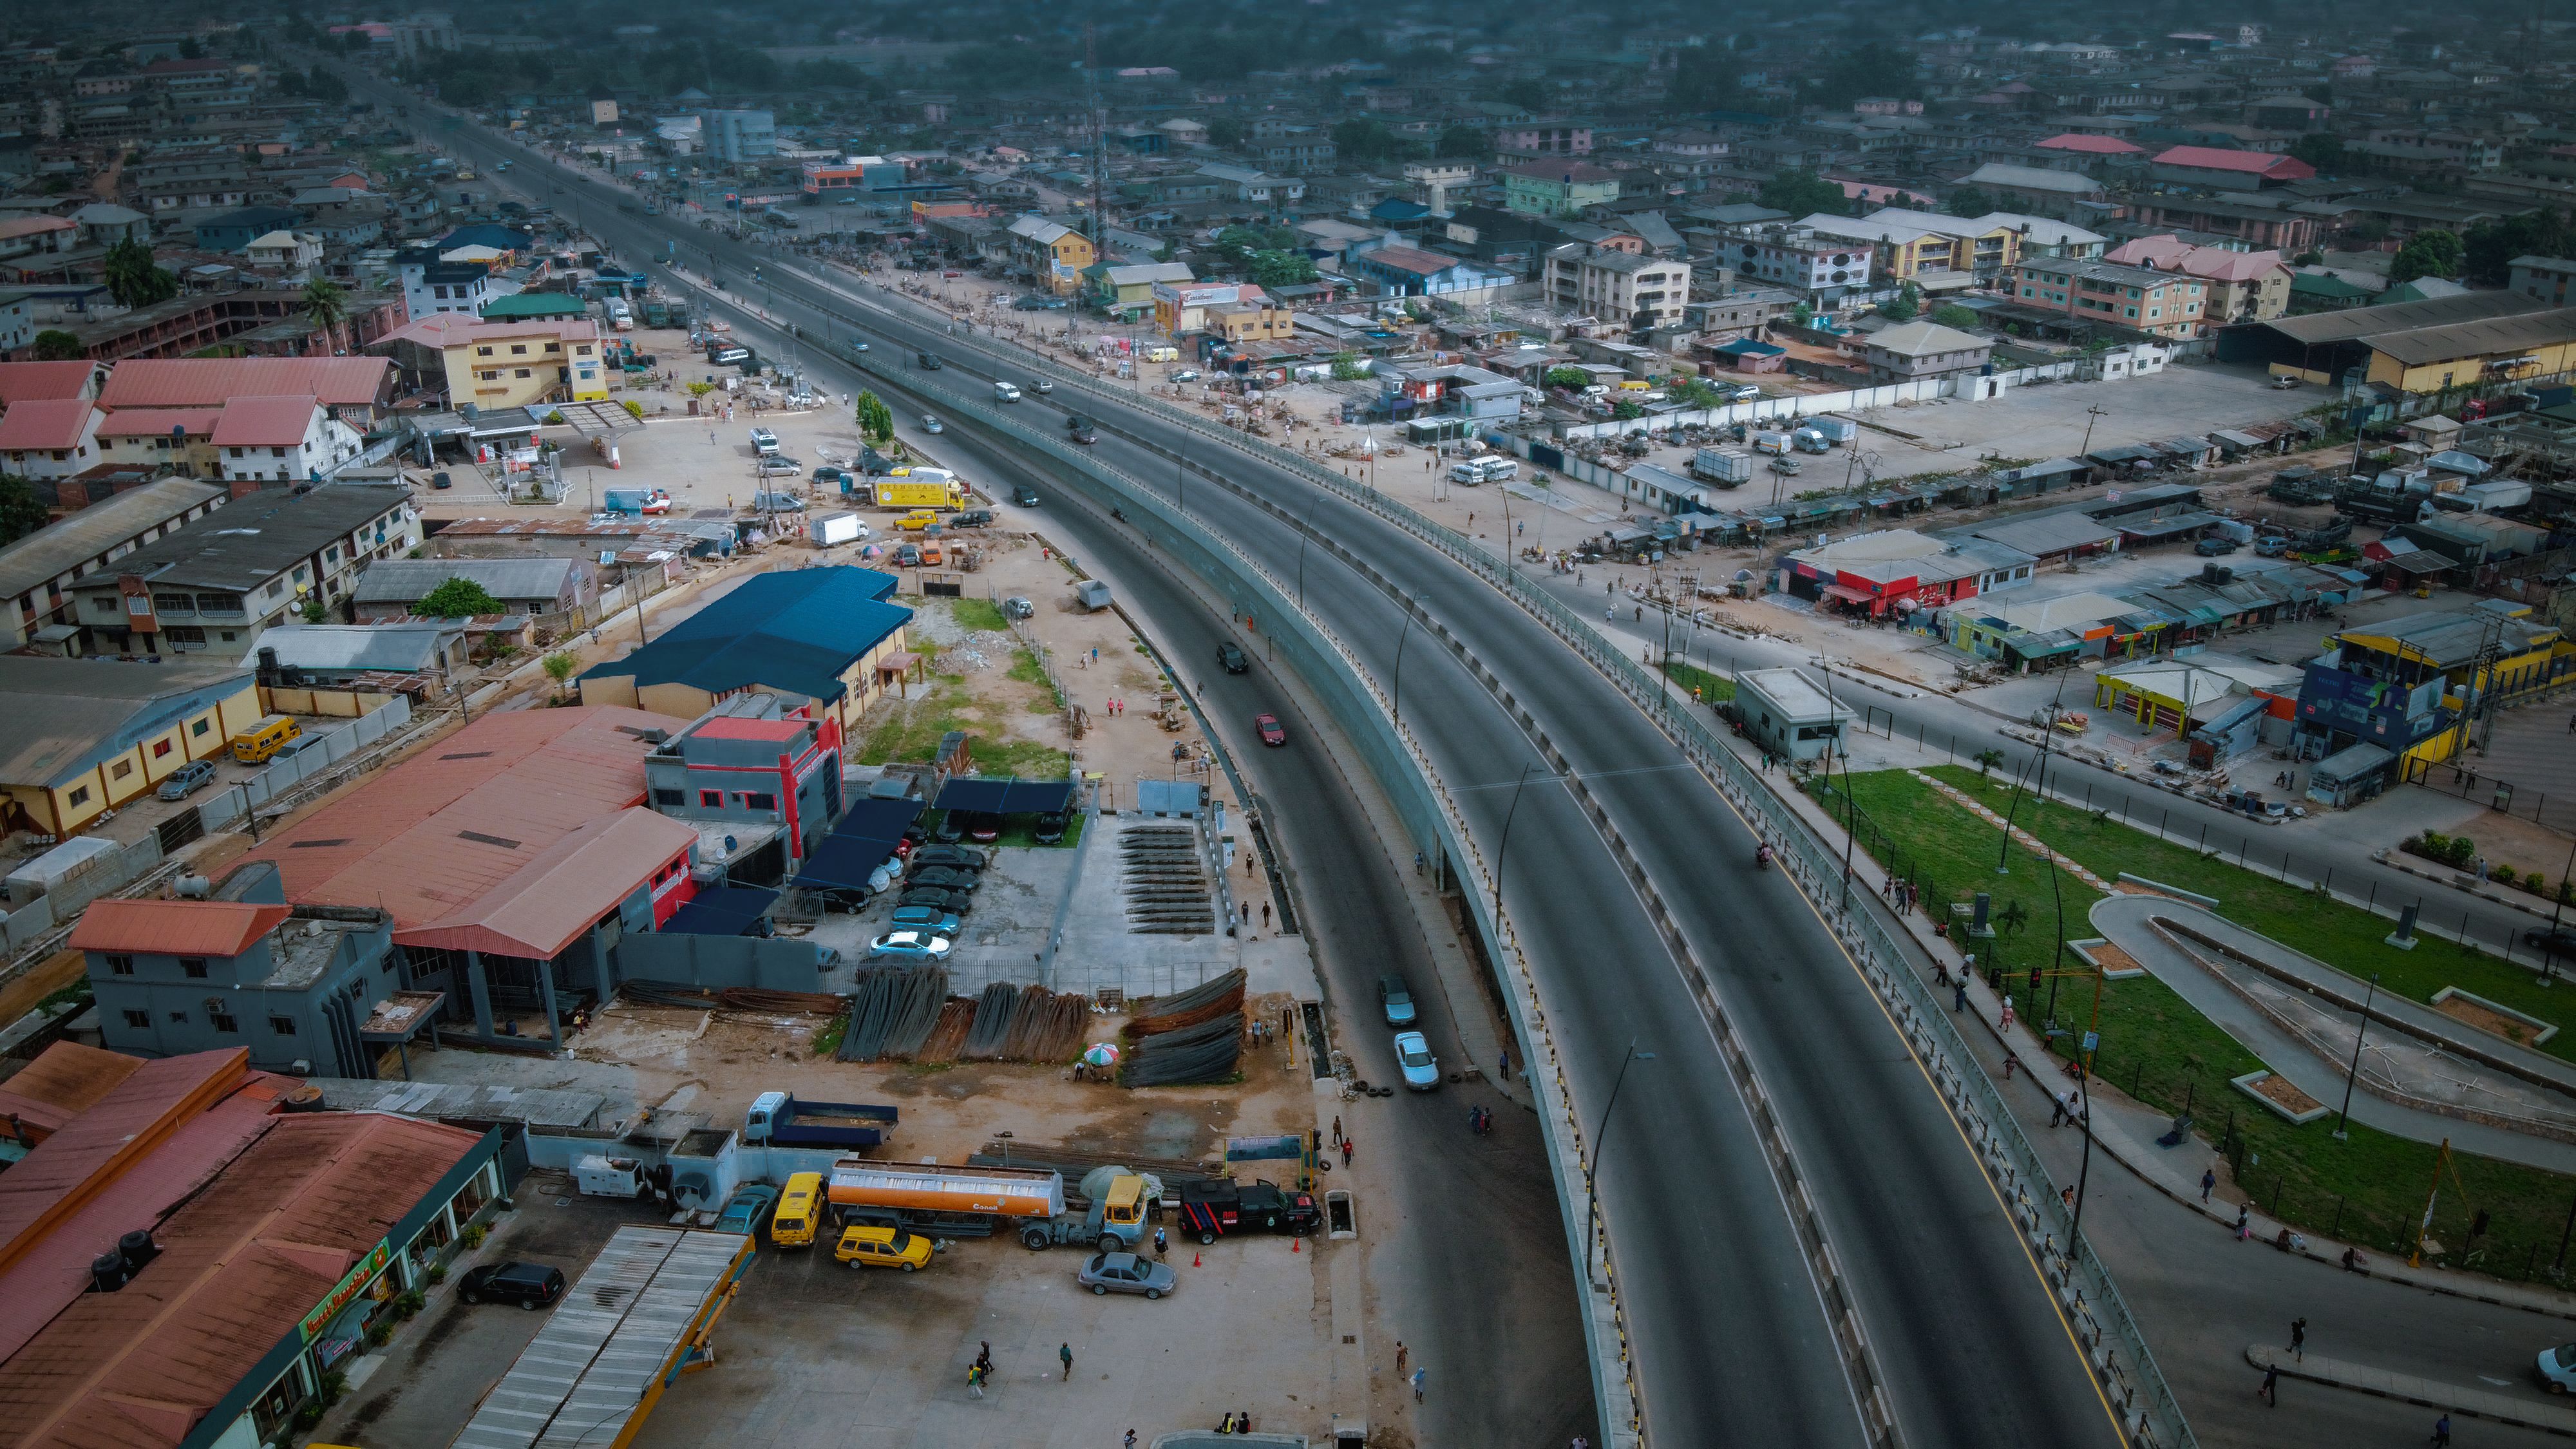 Aerial view of isolated area during the COVID-19 pandemic in Lagos. Image by Kehinde Temitope Odutayo / Shutterstock.com. Nigeria, 2020.